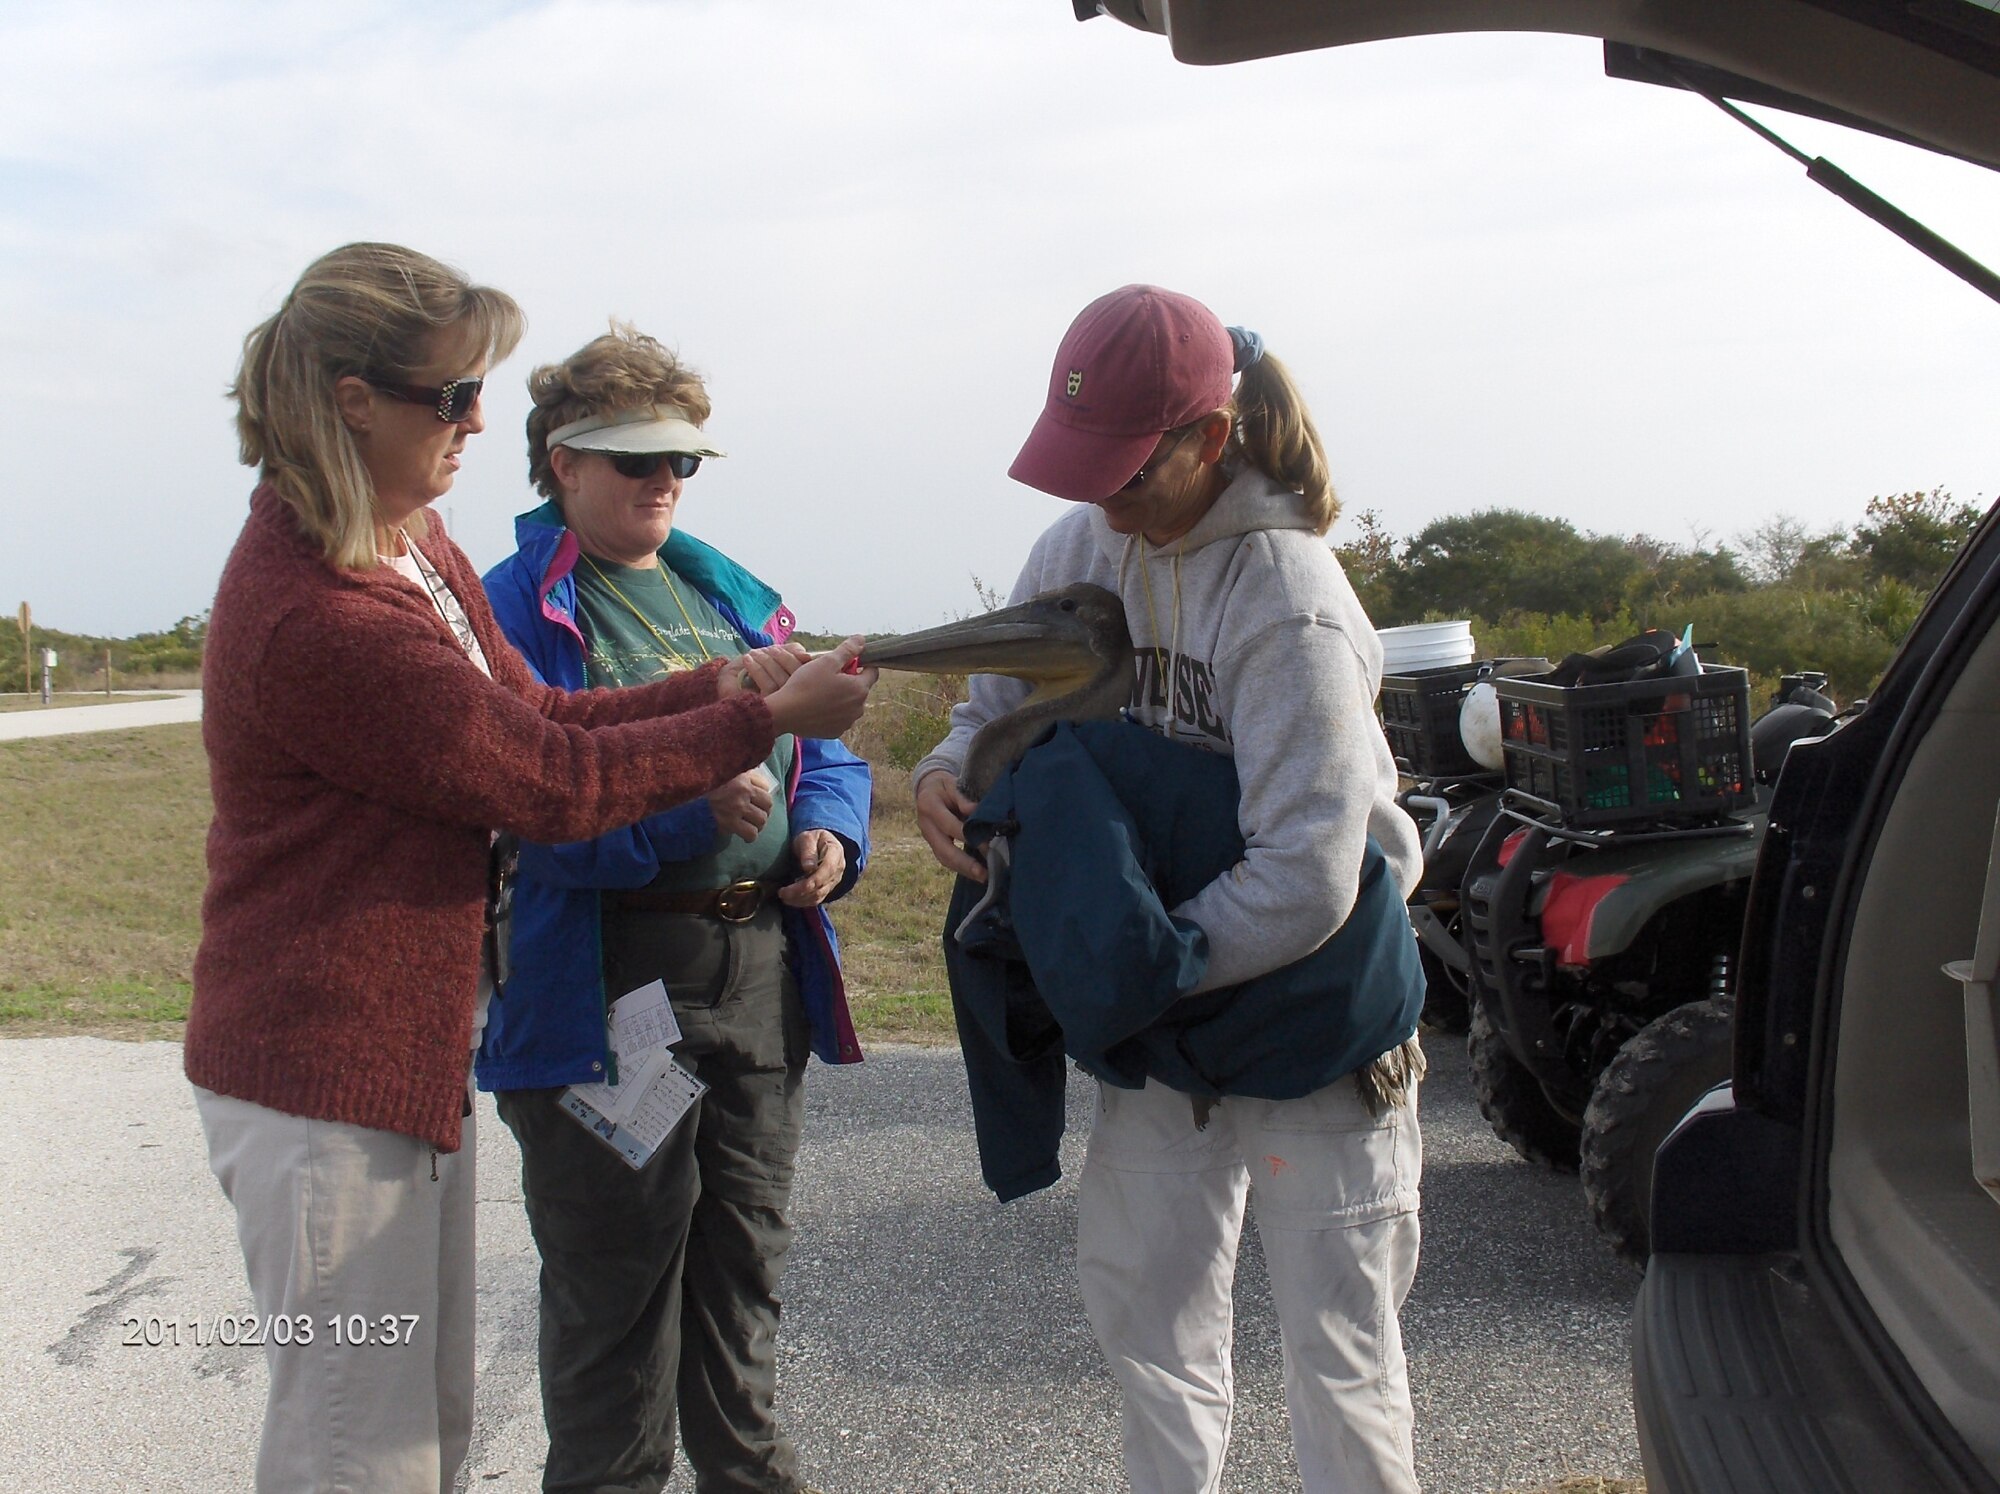 45th Space Wing Wildlife biologists rescue injured pelican. Pictured are (left to right) Mabel O'Quinn, Martha Carroll, and Angy Chambers. (courtesy photo)